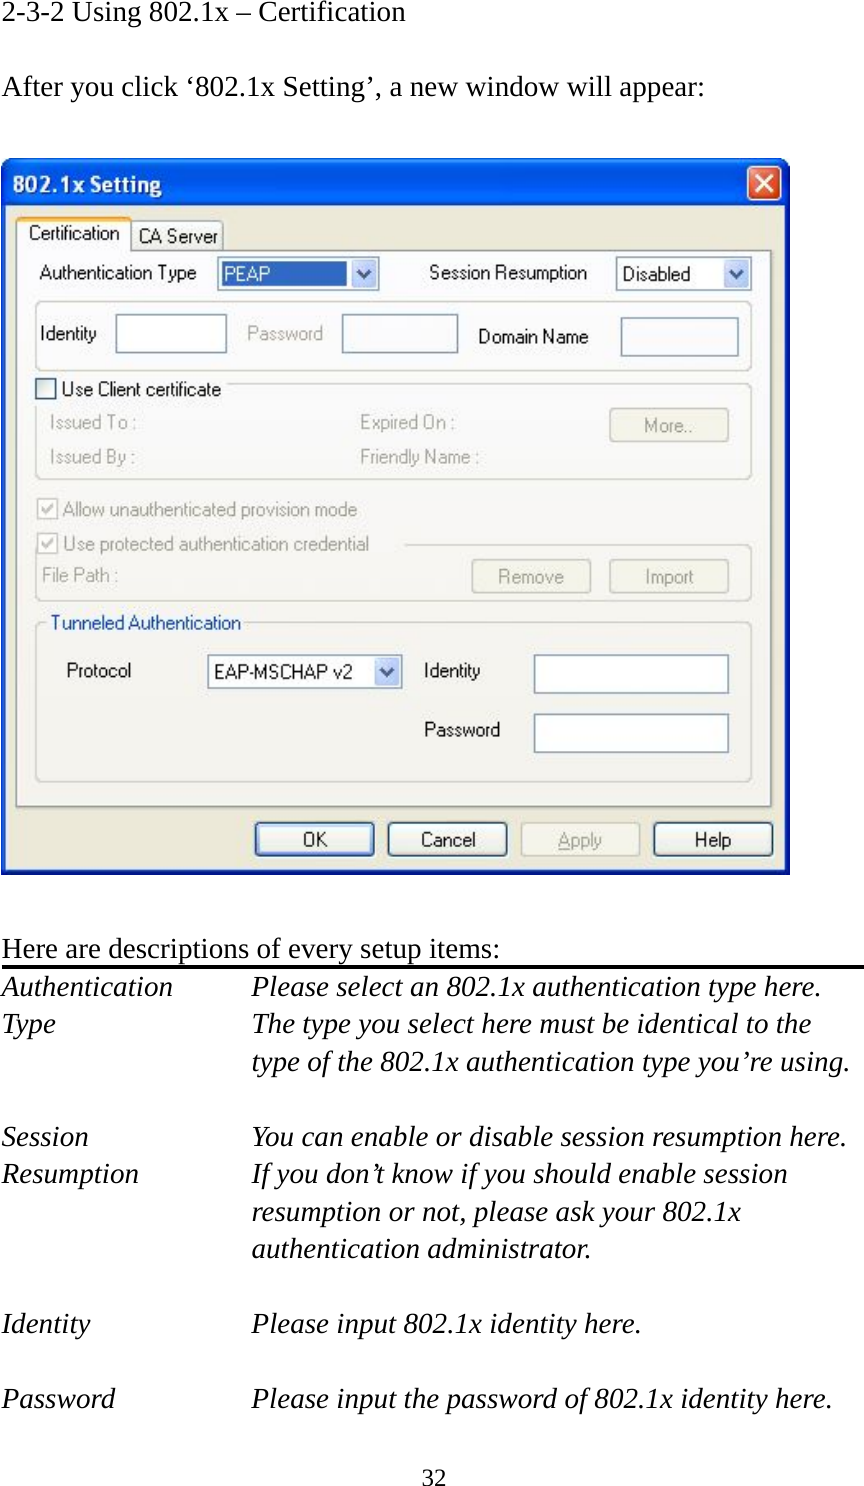  322-3-2 Using 802.1x – Certification  After you click ‘802.1x Setting’, a new window will appear:    Here are descriptions of every setup items: Authentication    Please select an 802.1x authentication type here. Type        The type you select here must be identical to the type of the 802.1x authentication type you’re using.  Session        You can enable or disable session resumption here. Resumption  If you don’t know if you should enable session resumption or not, please ask your 802.1x authentication administrator.  Identity  Please input 802.1x identity here.  Password  Please input the password of 802.1x identity here. 